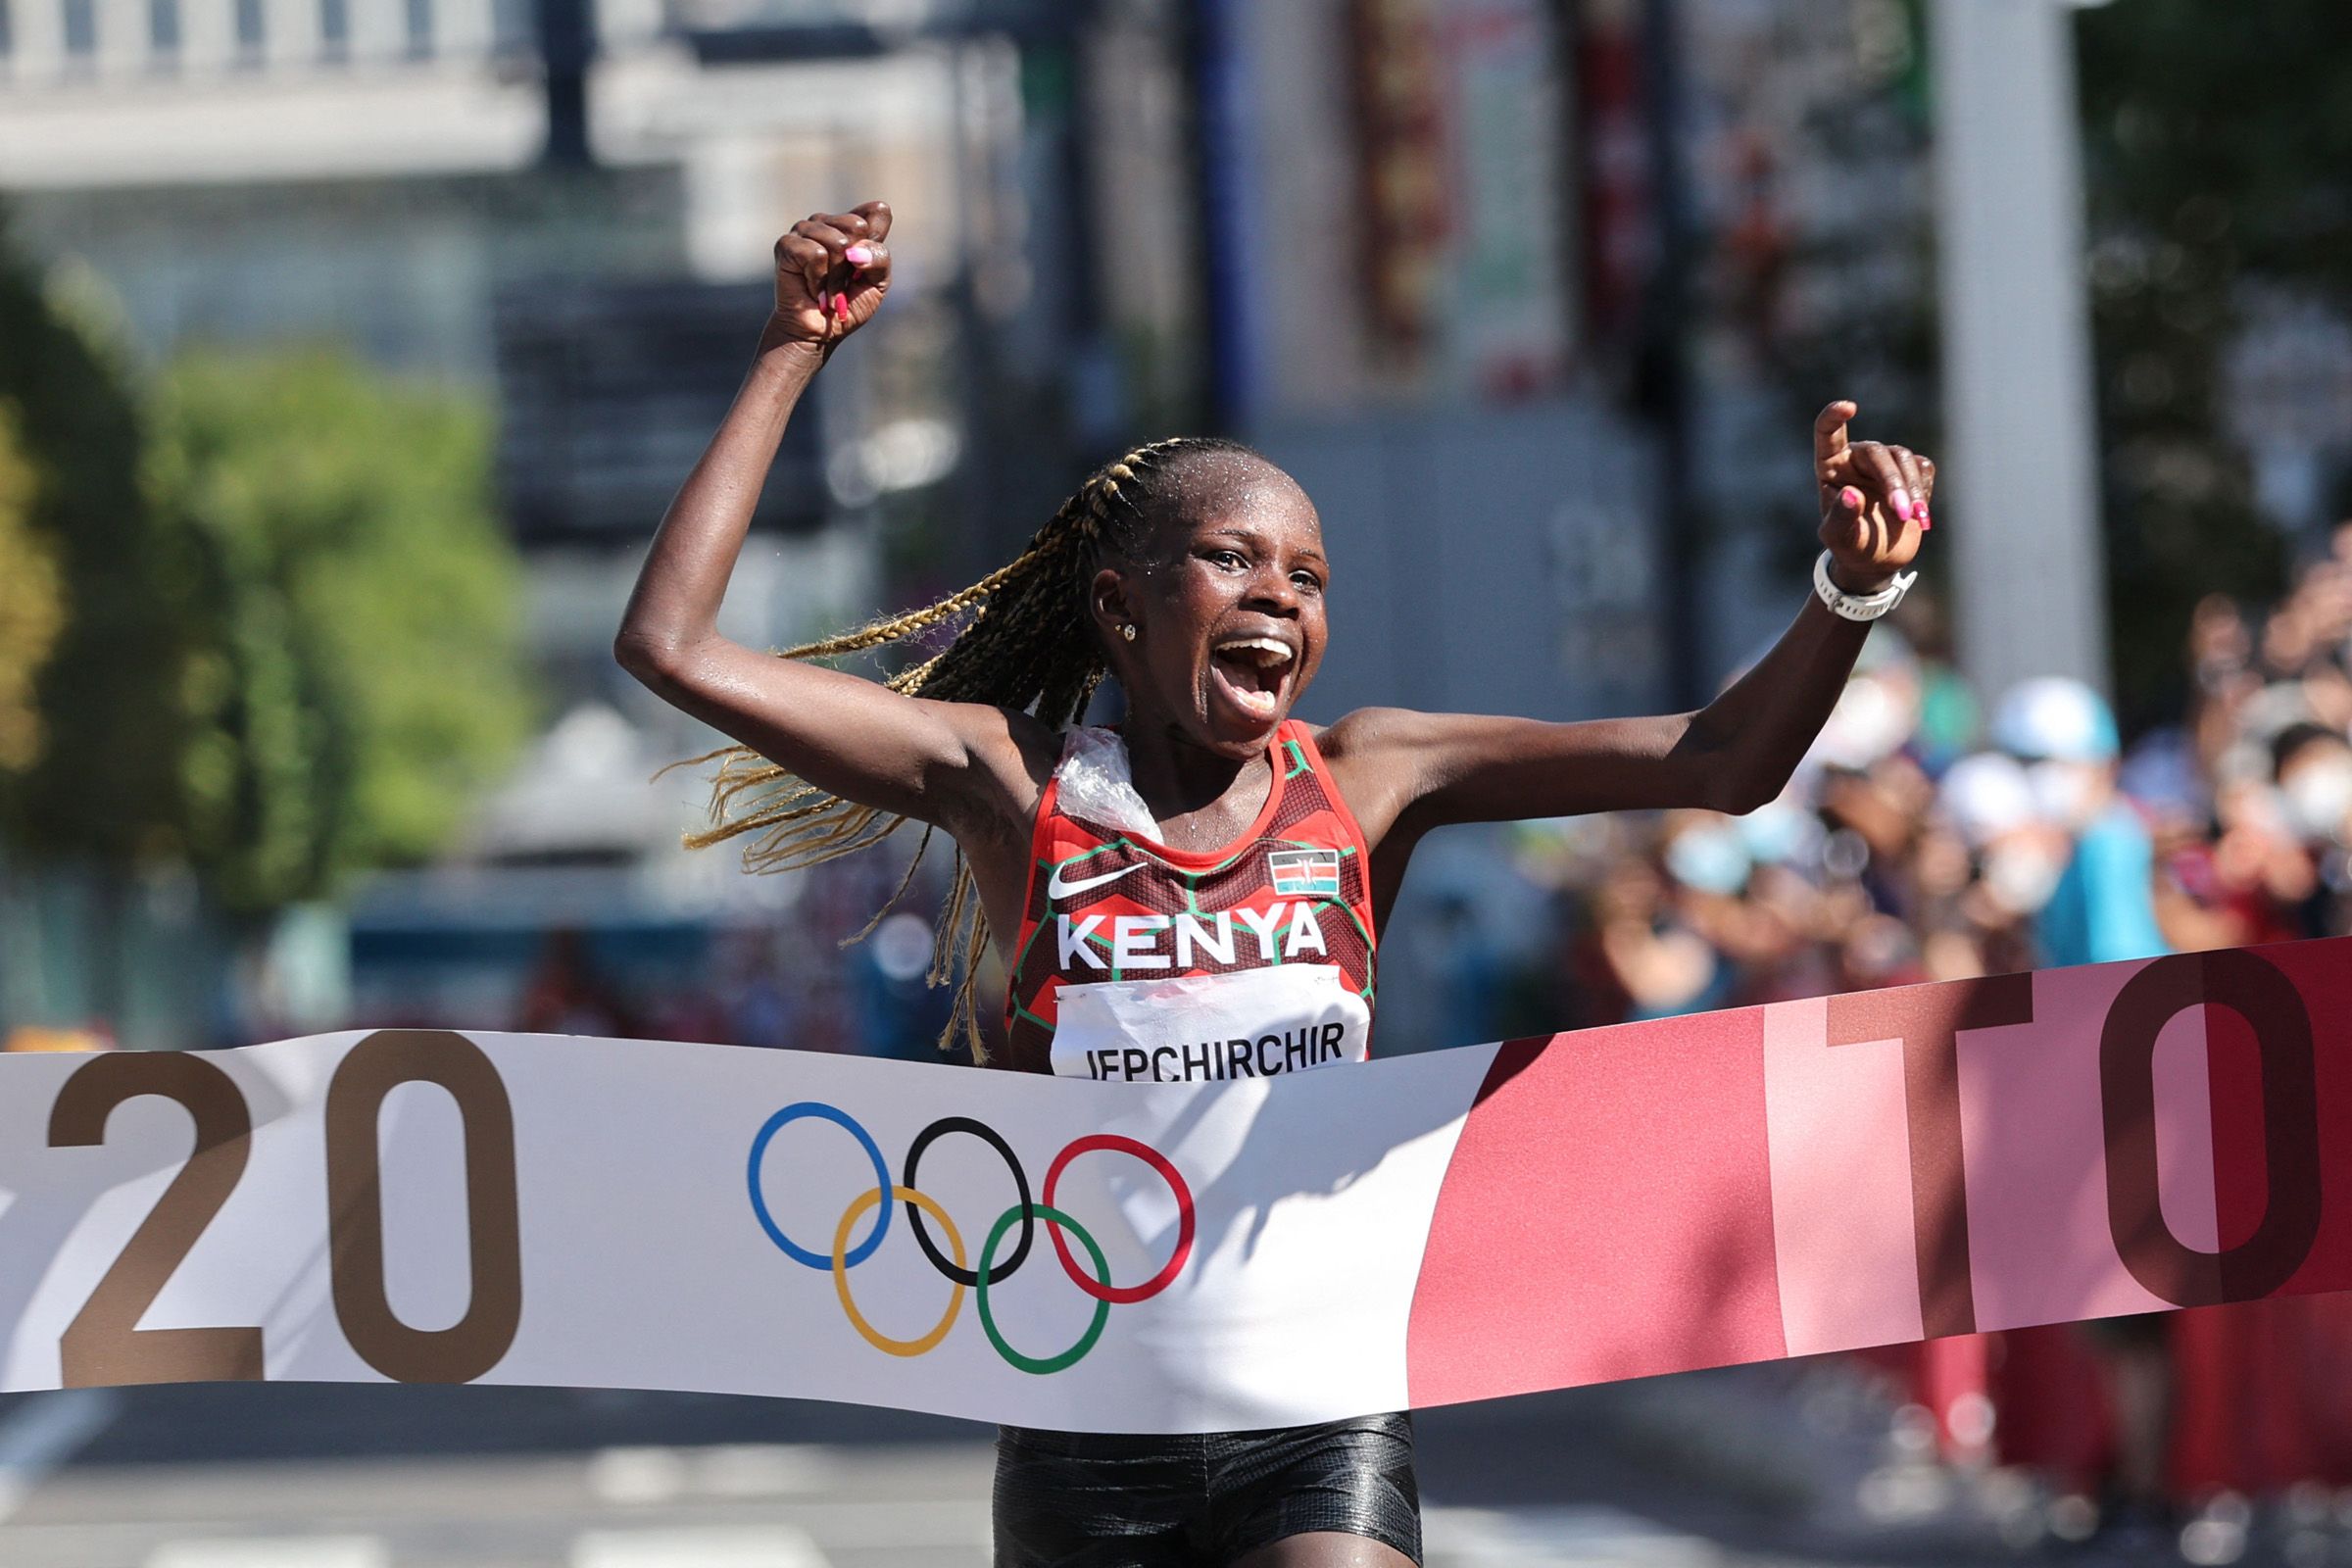 Peres Jepchirchir wins the marathon at the Tokyo Olympic Games